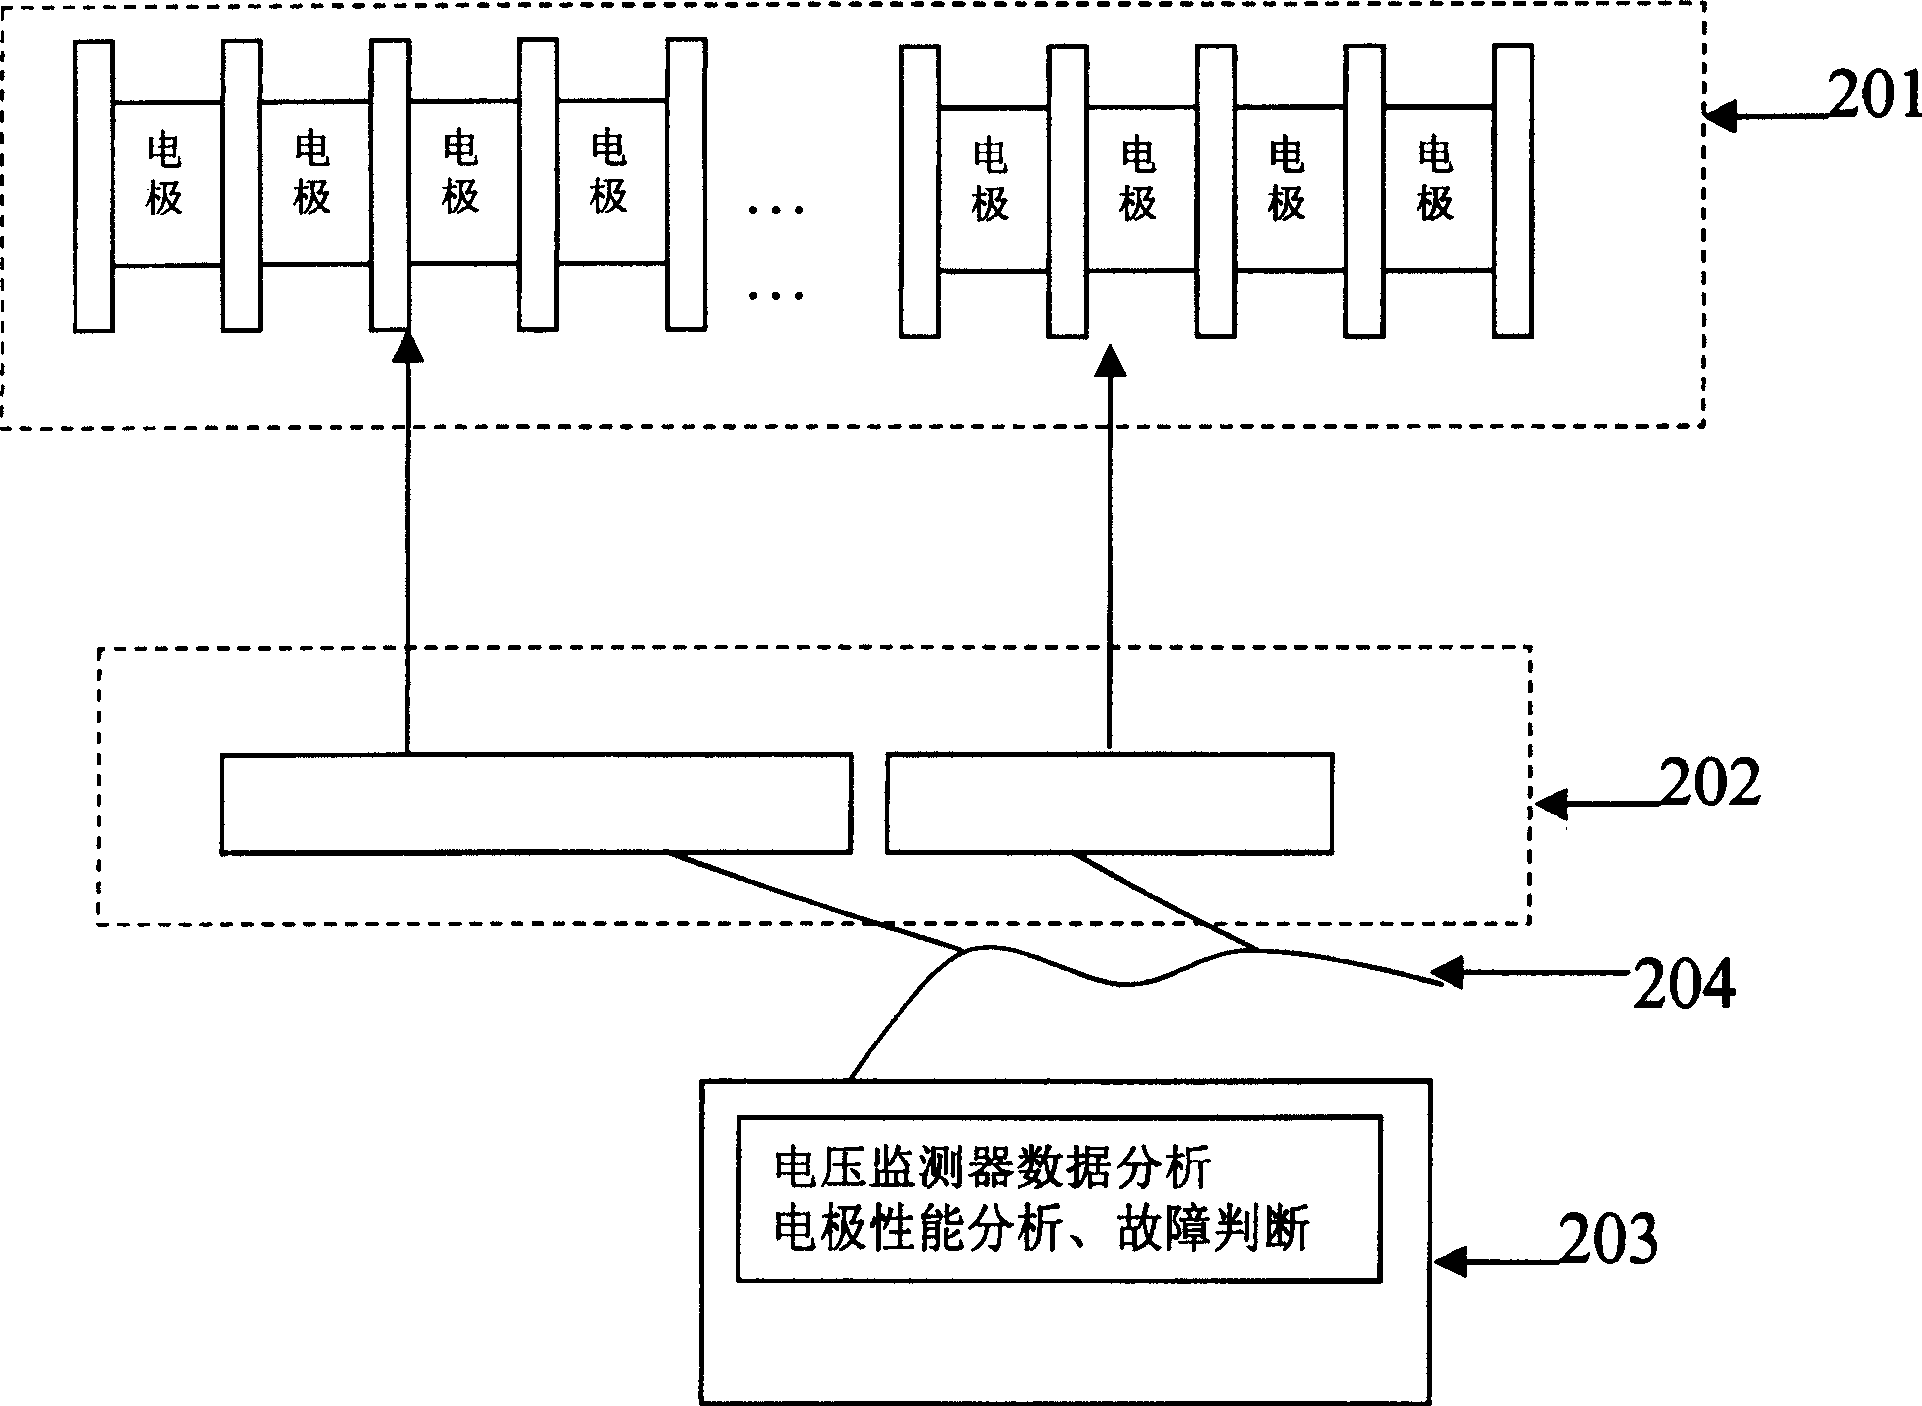 Safety and precise fuel cell voltage monitoring apparatus